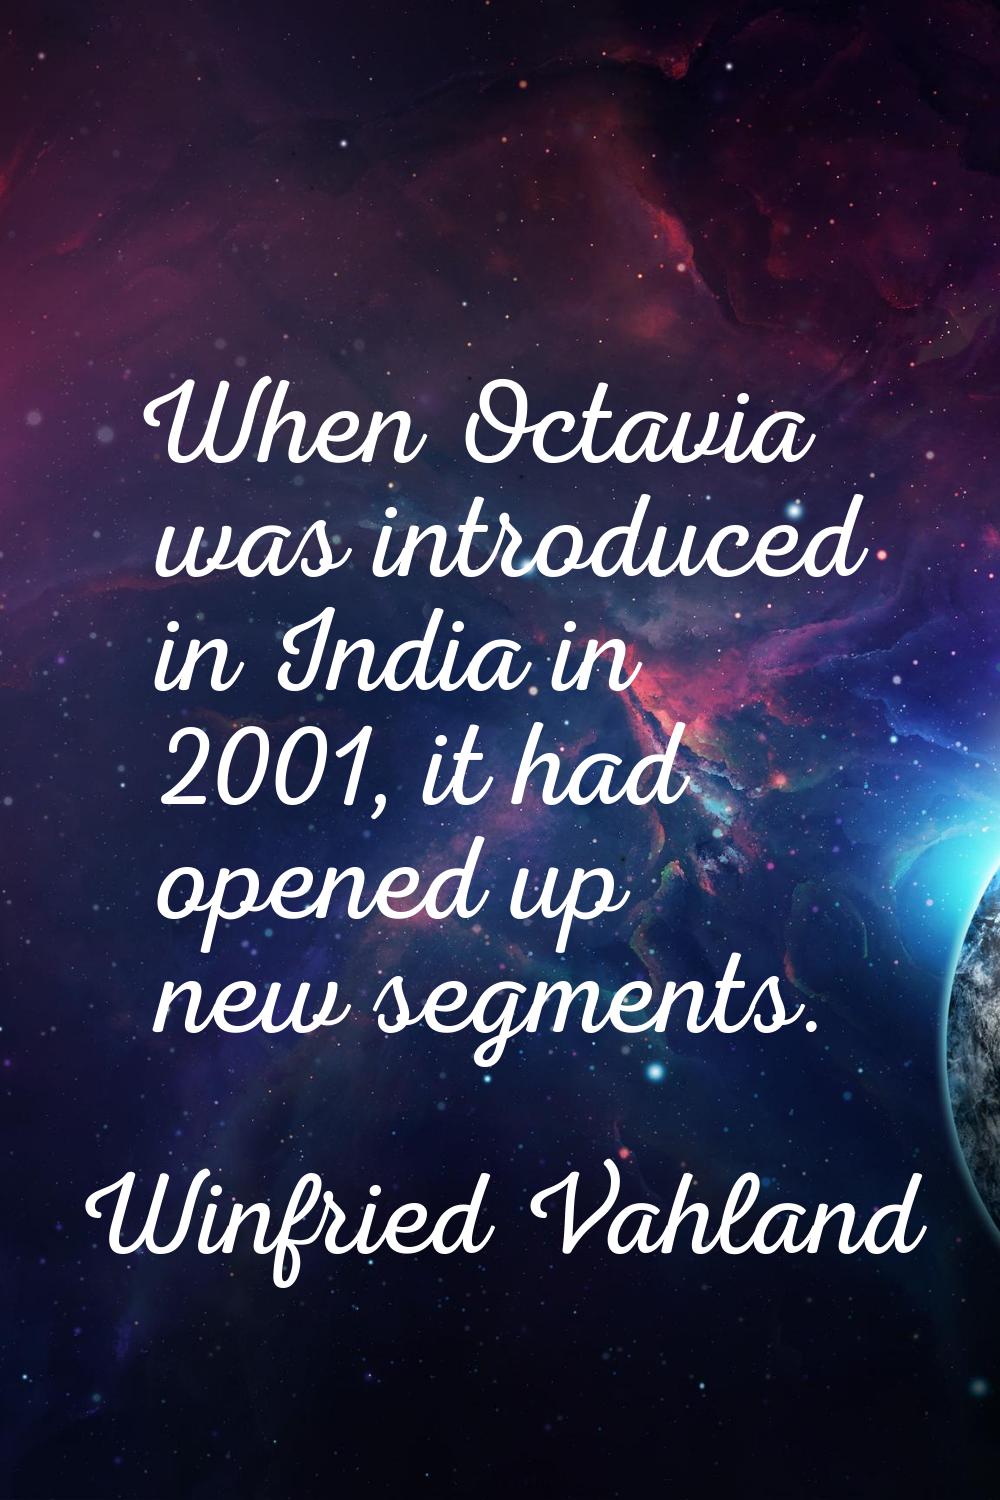 When Octavia was introduced in India in 2001, it had opened up new segments.